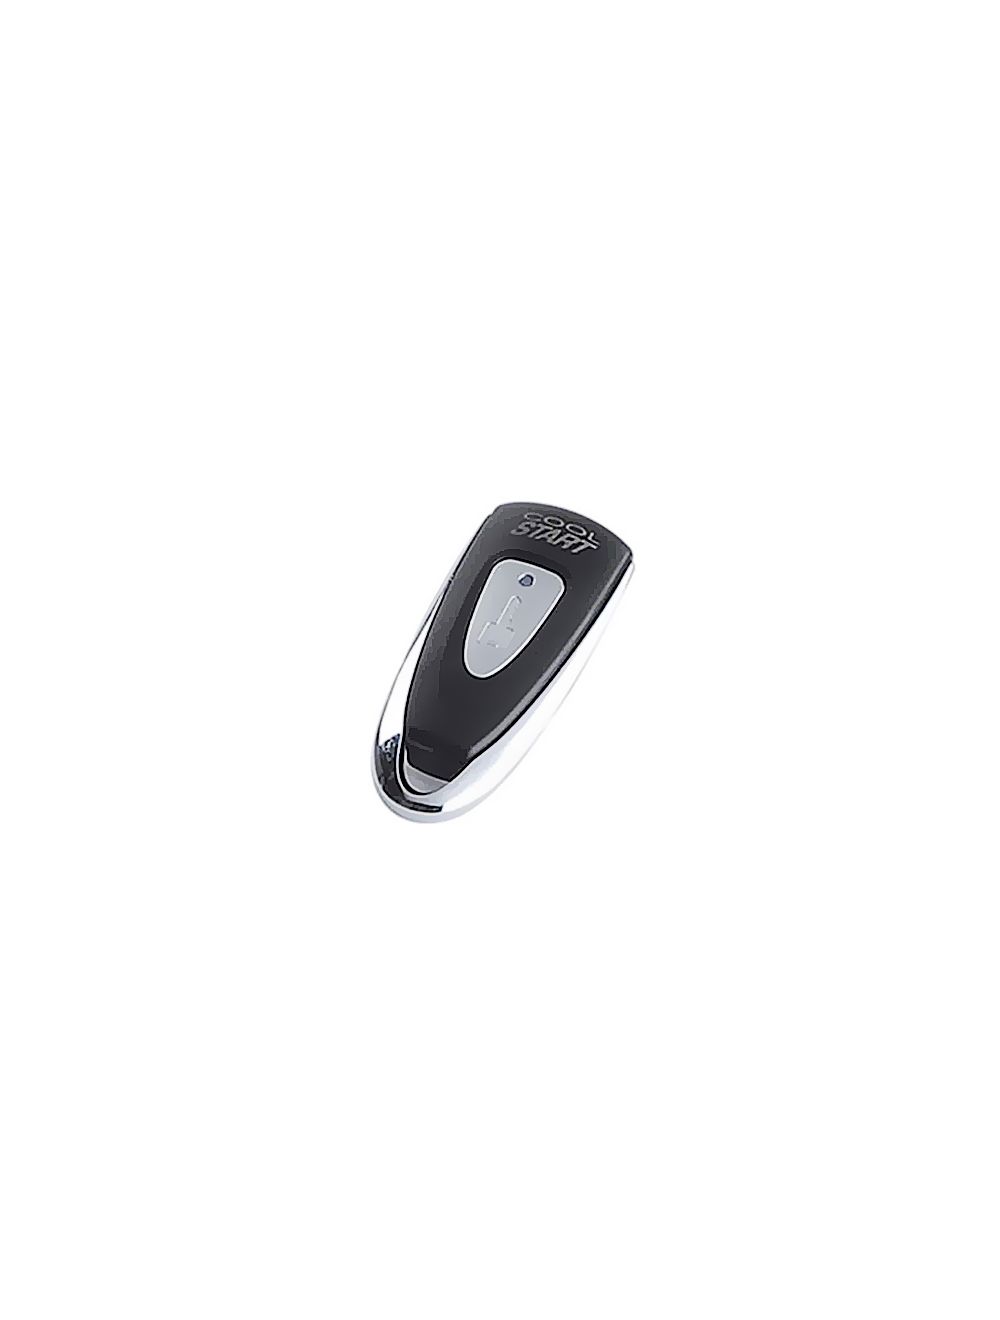 CrimeStopper RSTX1G4 - RS1 Replacement Remote 1 Button